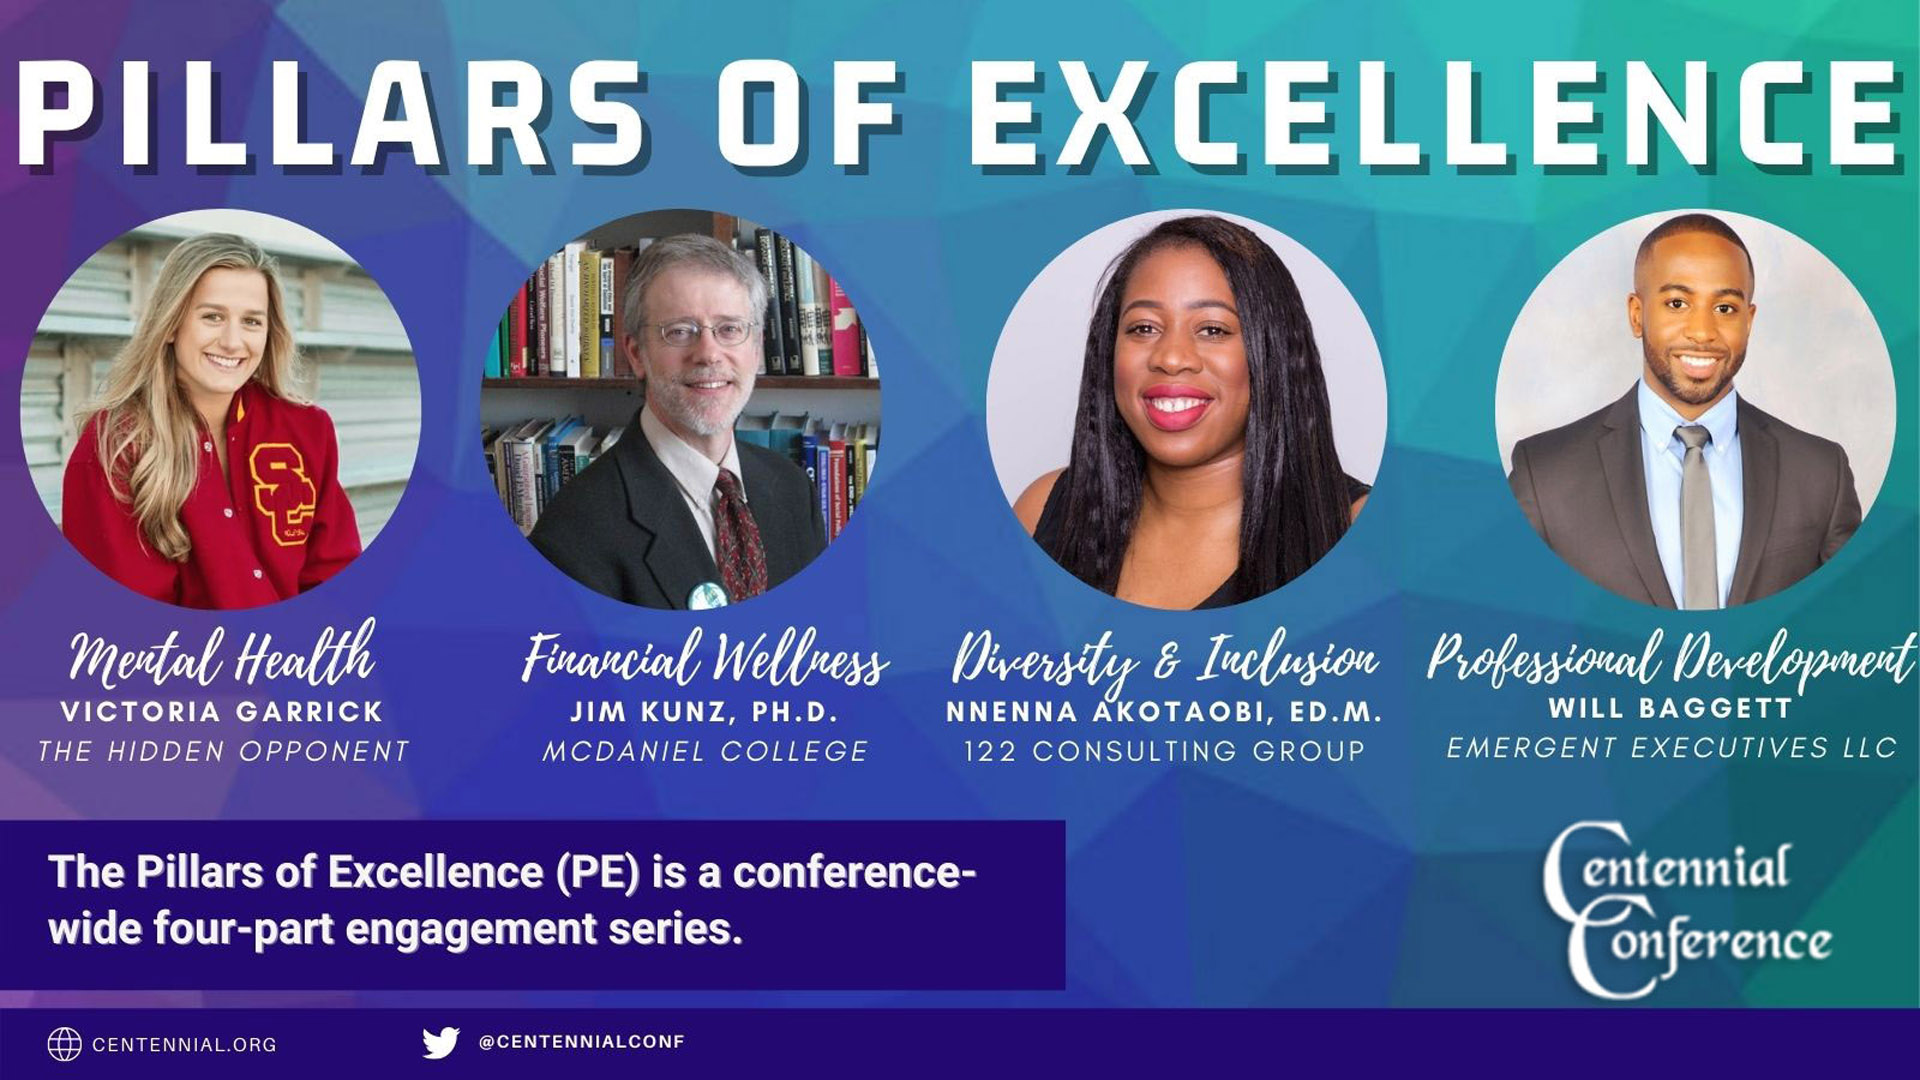 Centennial Conference Announces Part Two of the Pillars of Excellence Speaker Series